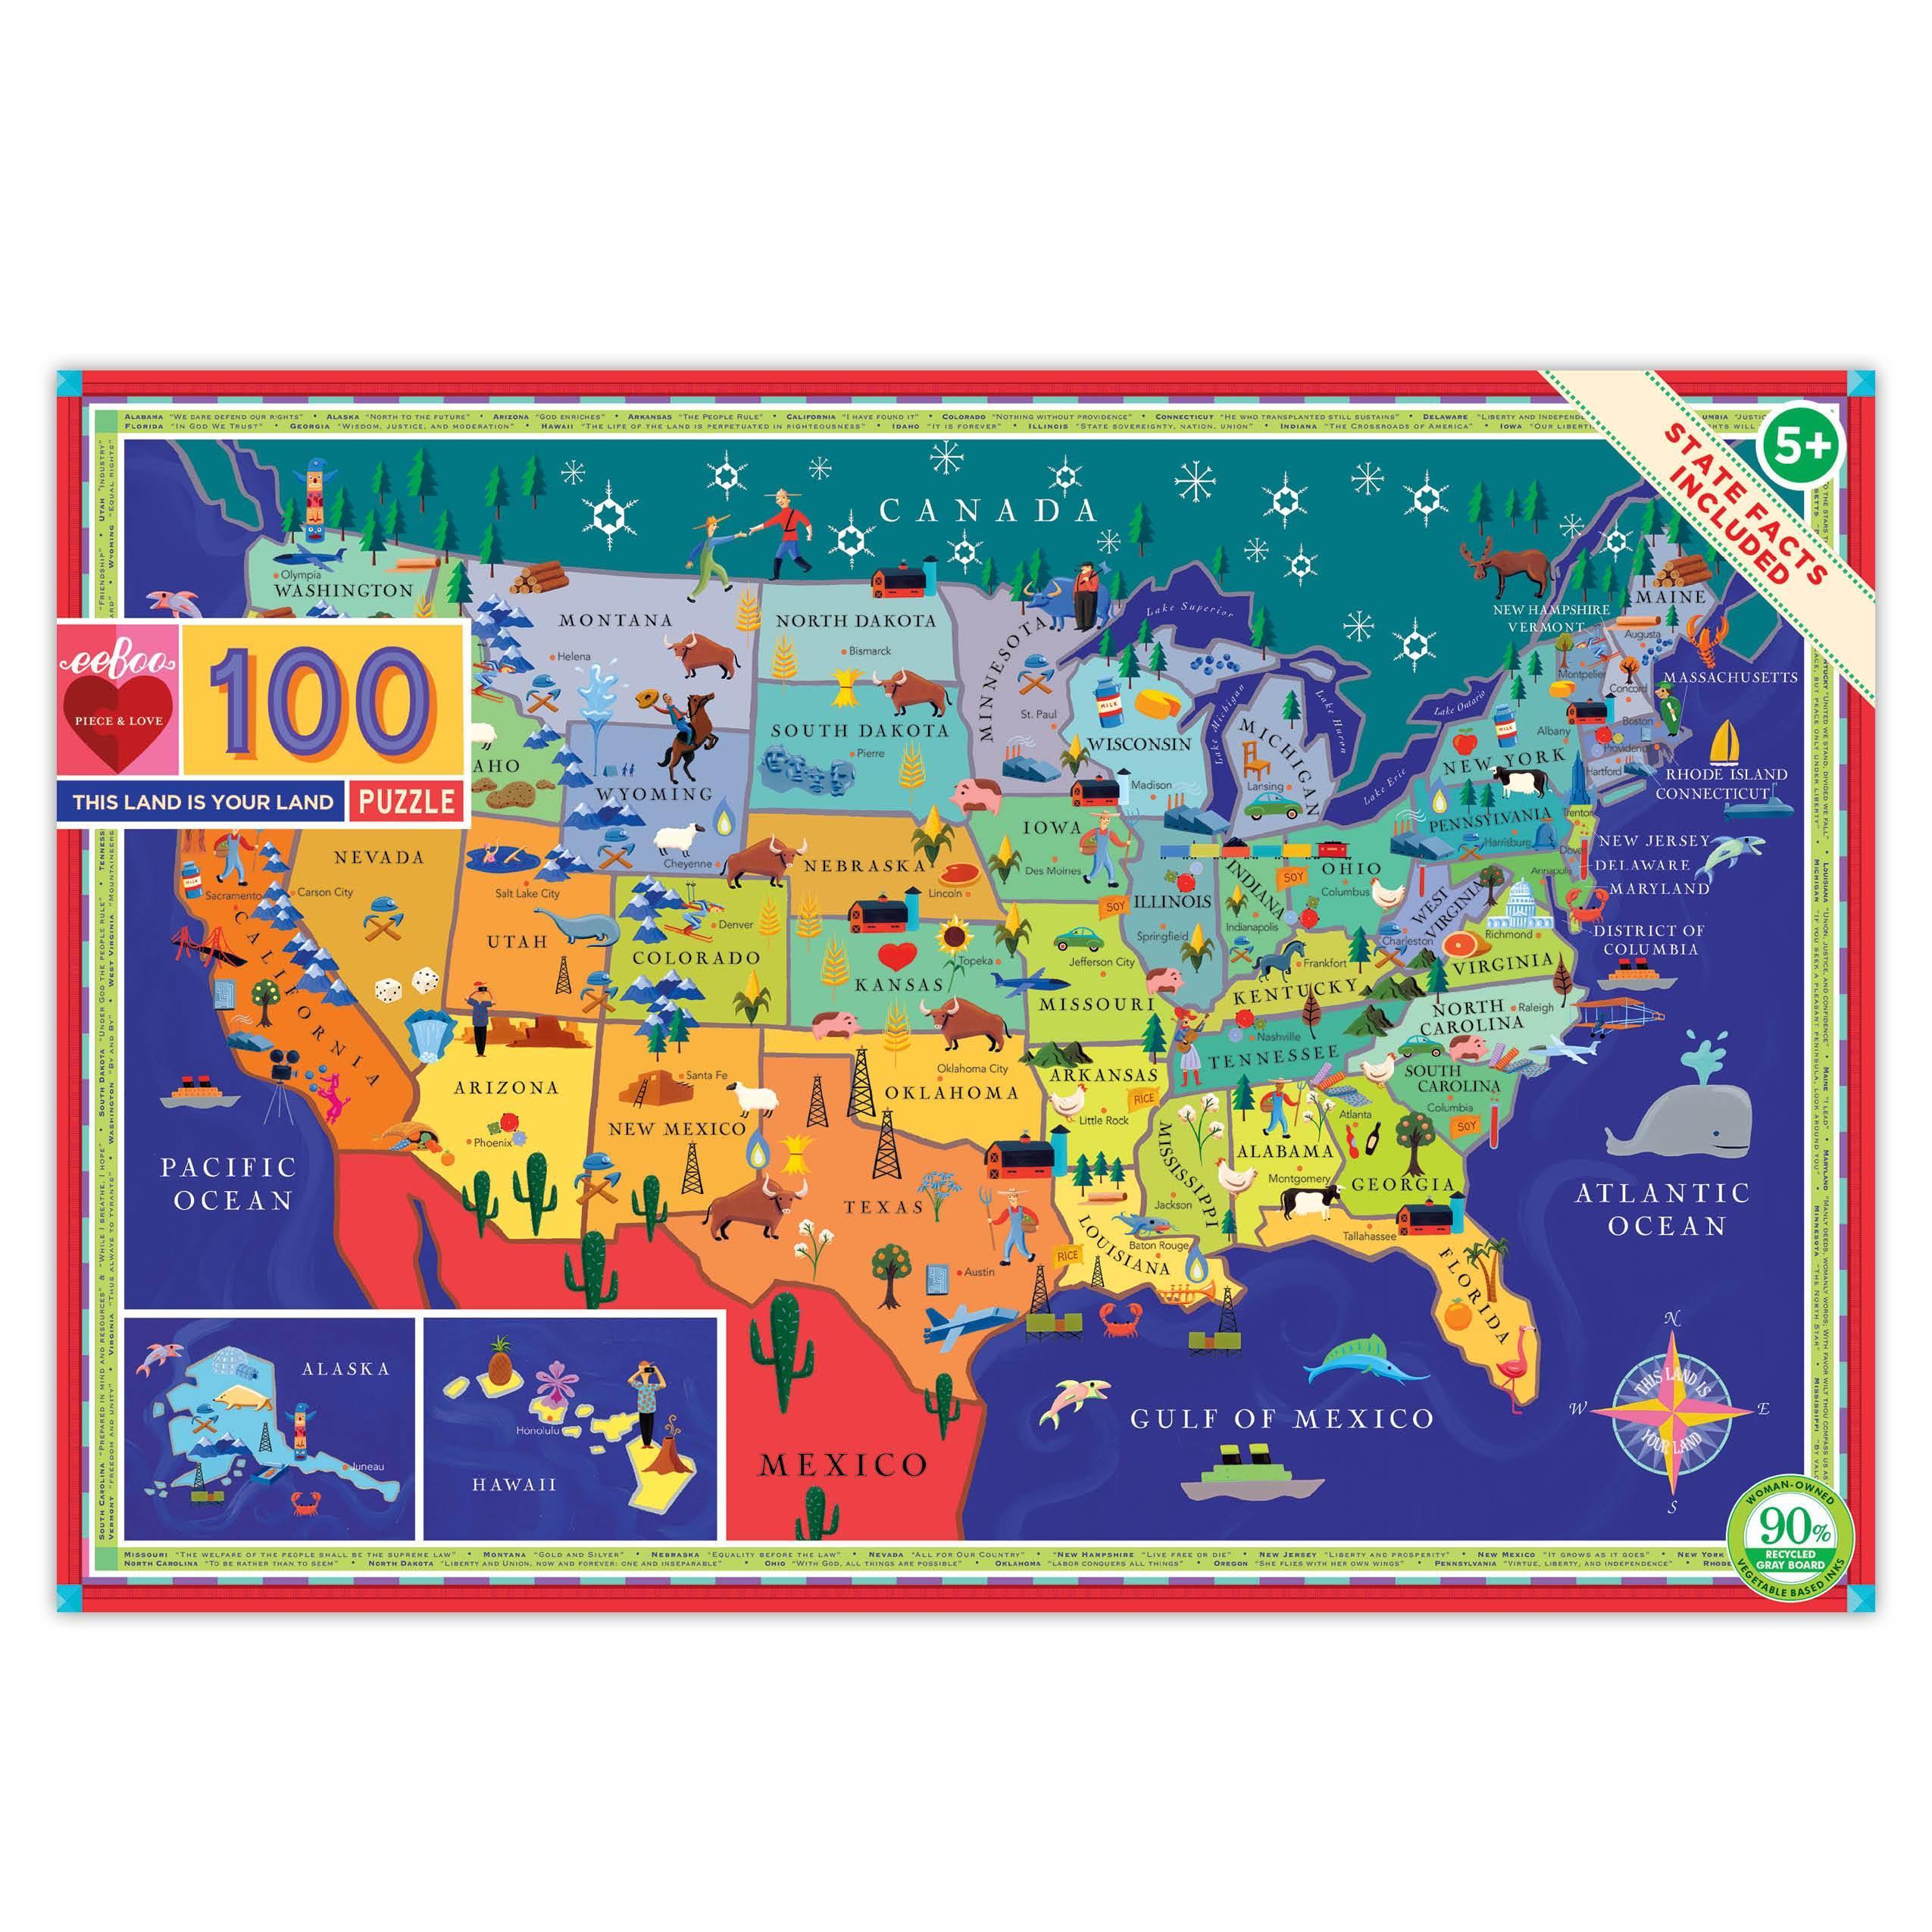 This Land is Your Land 100 Piece Puzzle - Why and Whale